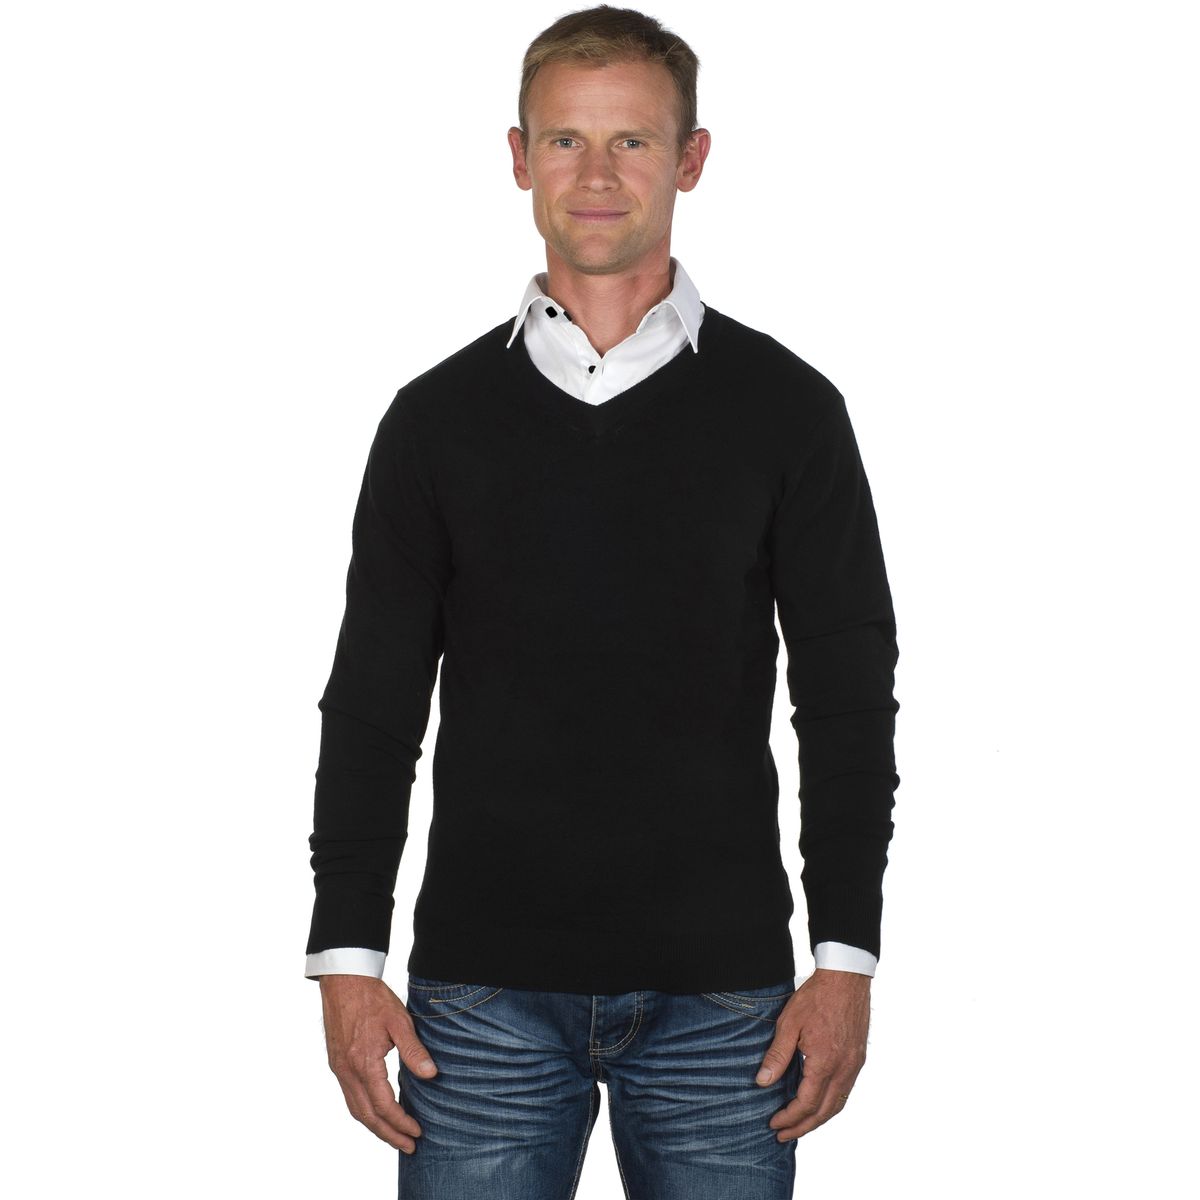 Nouvelle Chemise à Manches Longues Sweat-shirt fine Guage Col V Pull Casual Pull Pullover